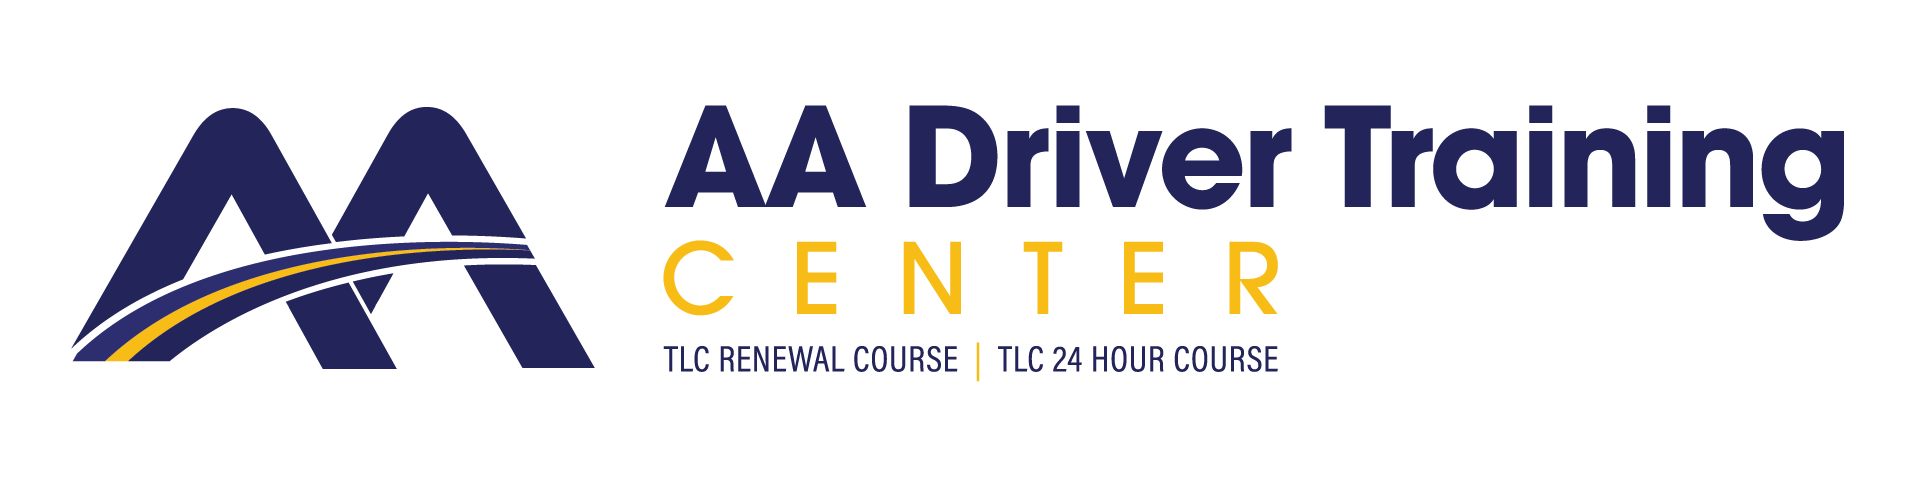 24 Hour TLC Class Brooklyn, NYC & Queens NY - AA Driver Training Center